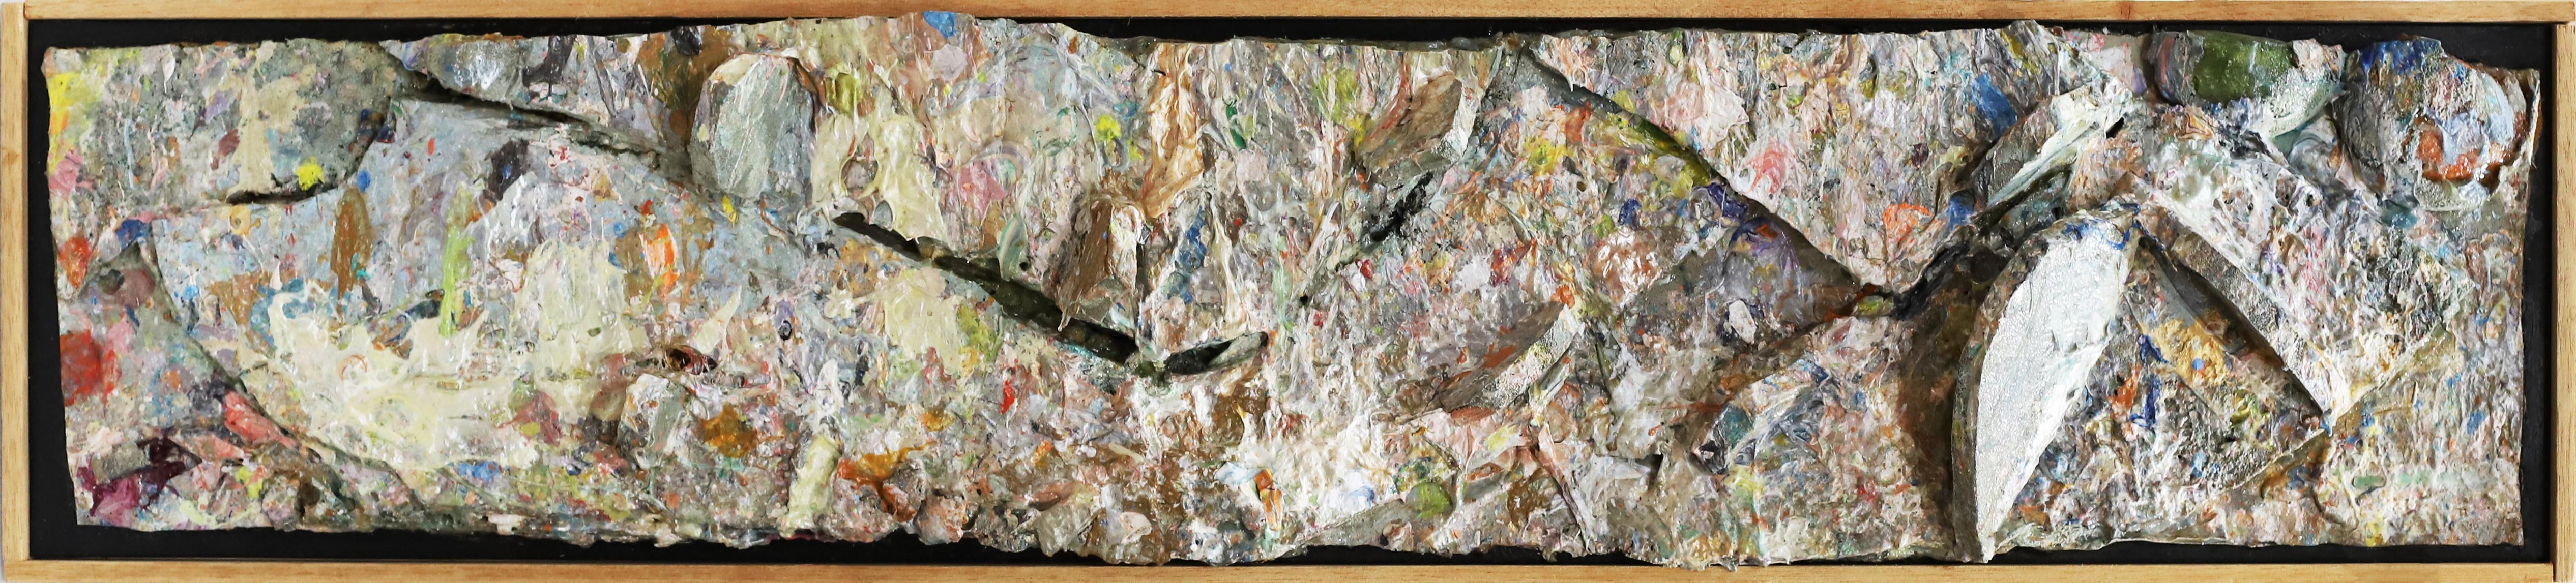  89AS-1 - Painting by Larry Poons